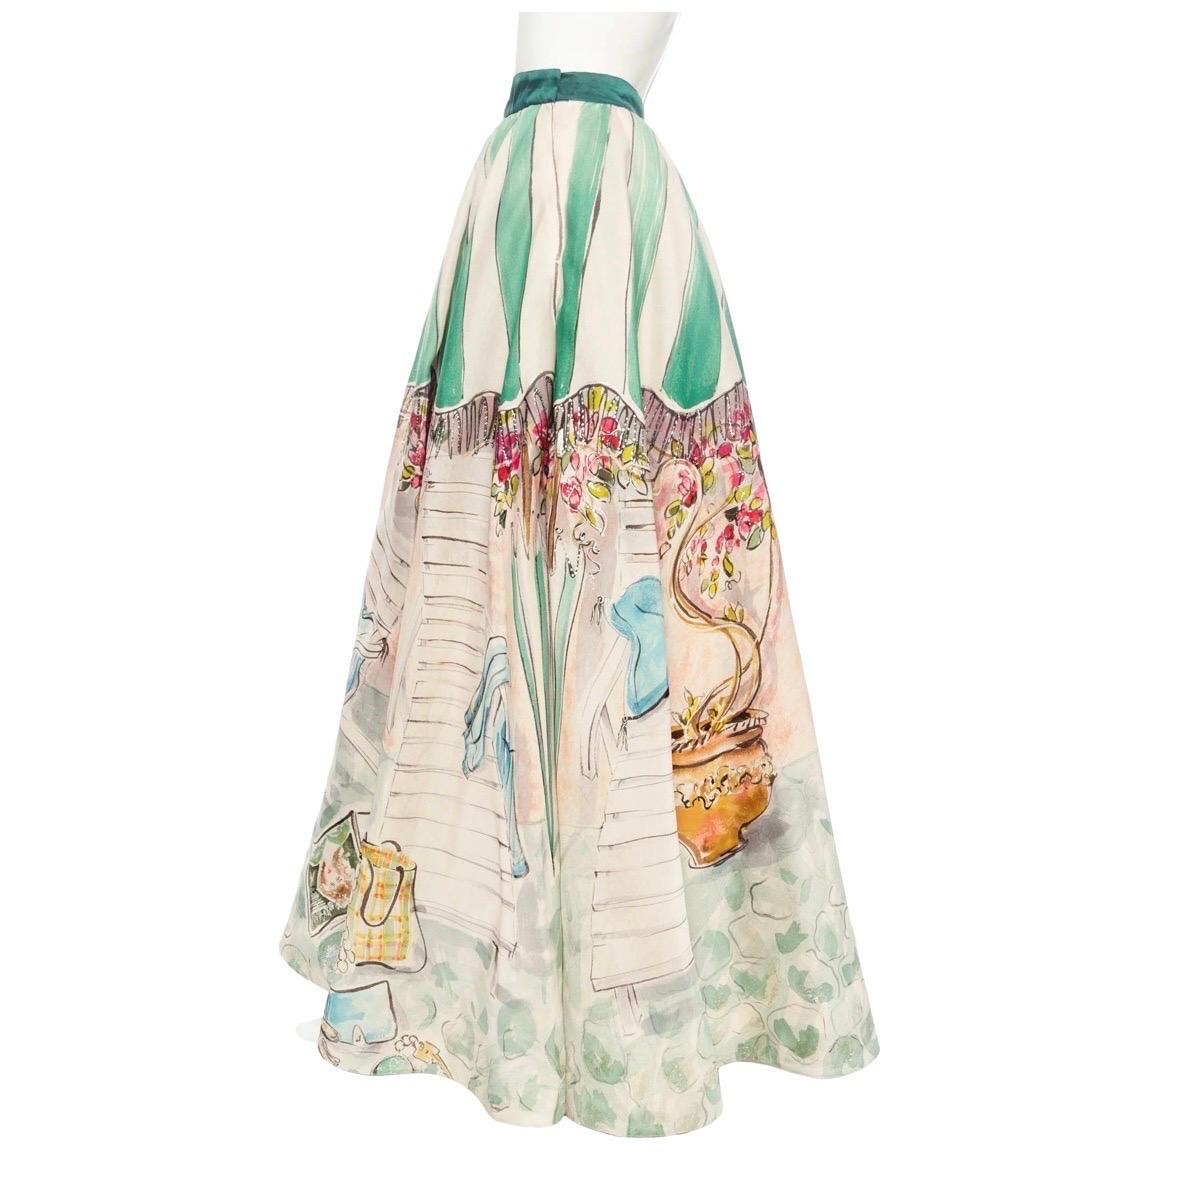 Perry Ellis 1992 Hand-Painted Cotton Organdy Full Skirt (Marc Jacobs) In Good Condition For Sale In Los Angeles, CA